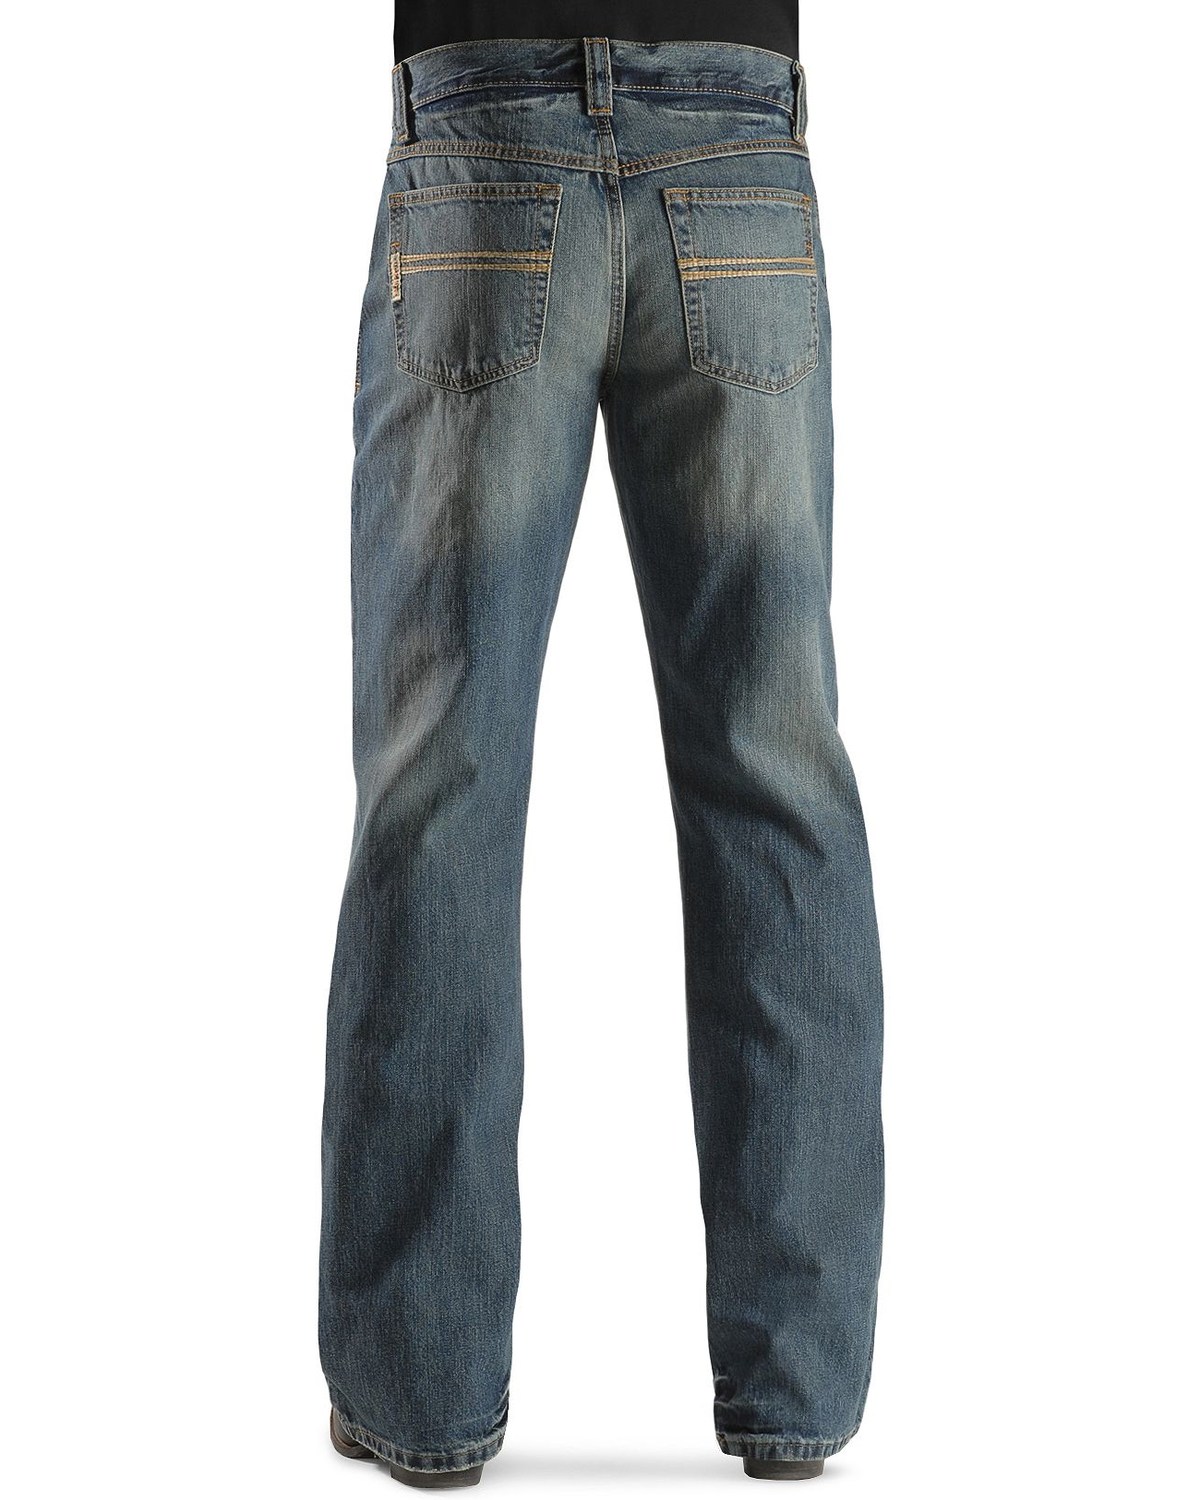 Cinch Men's Carter Relaxed Fit Boot Cut Jeans